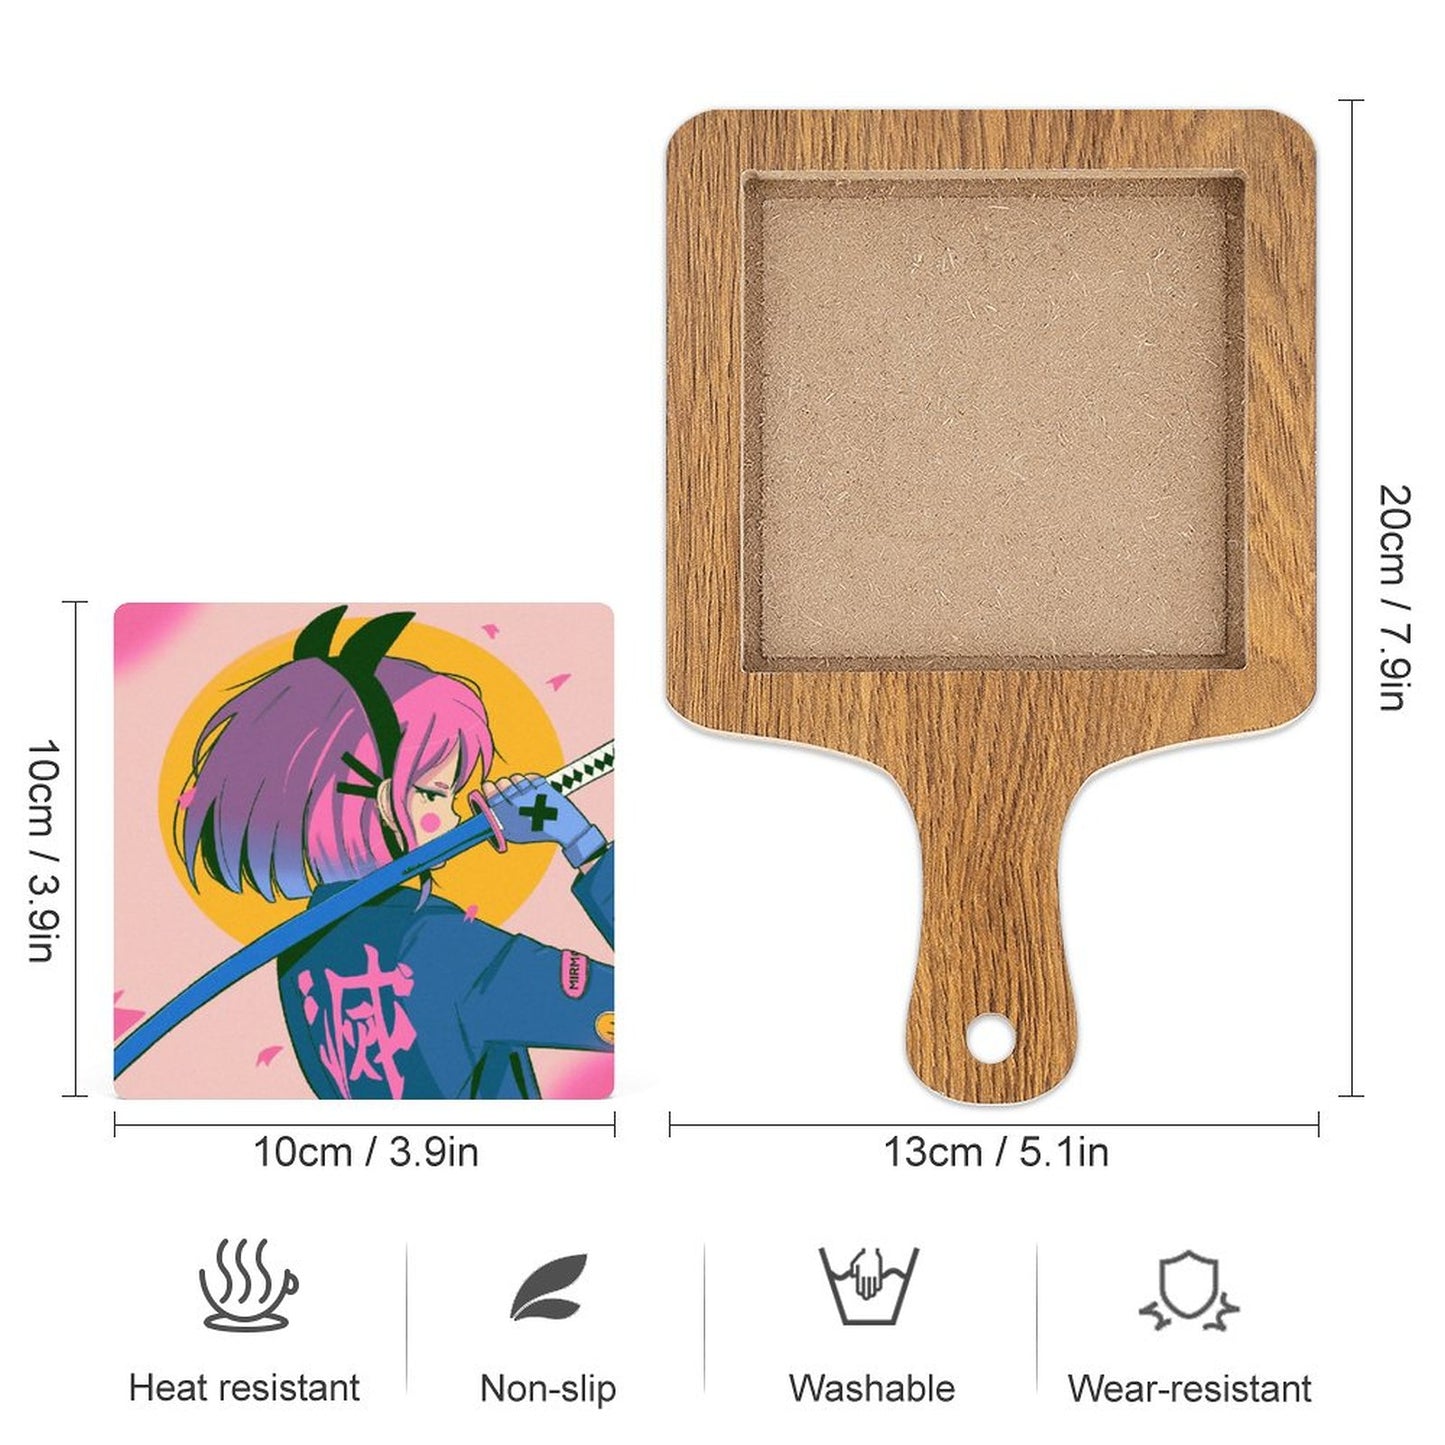 Online Customize Wooden Tray Coaster